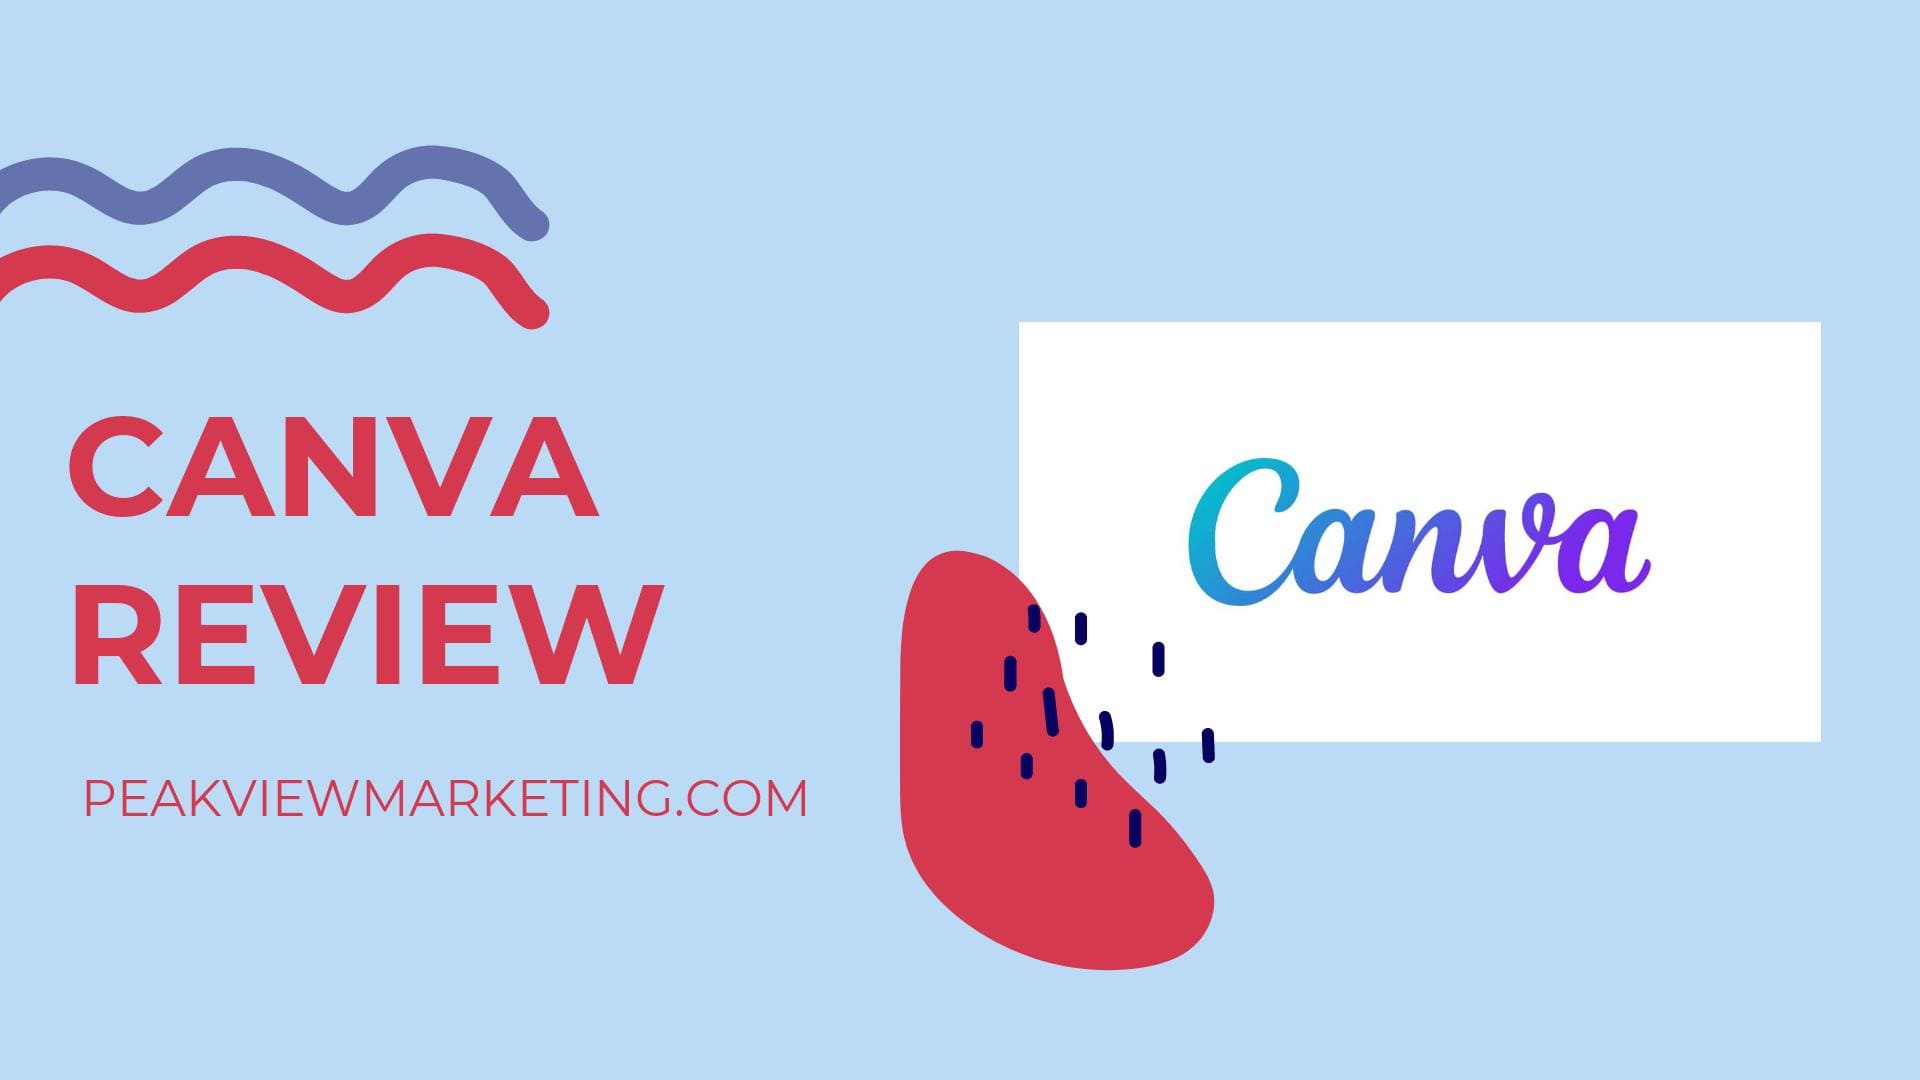 Canva Review Image